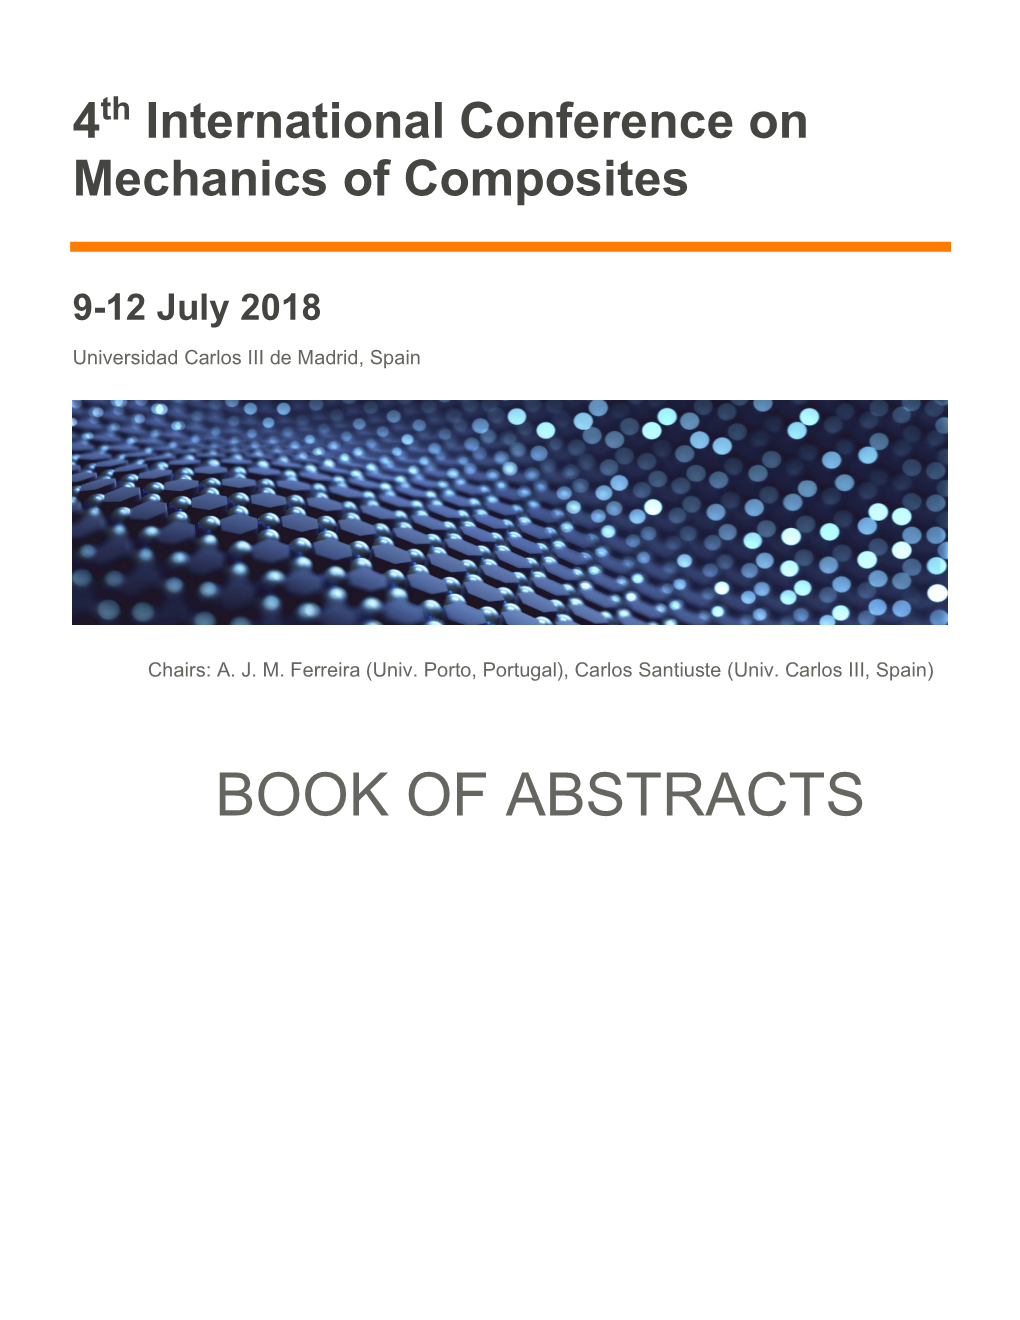 BOOK of ABSTRACTS Conferências 5: Book of Abstracts 15/05/2018, 08:15